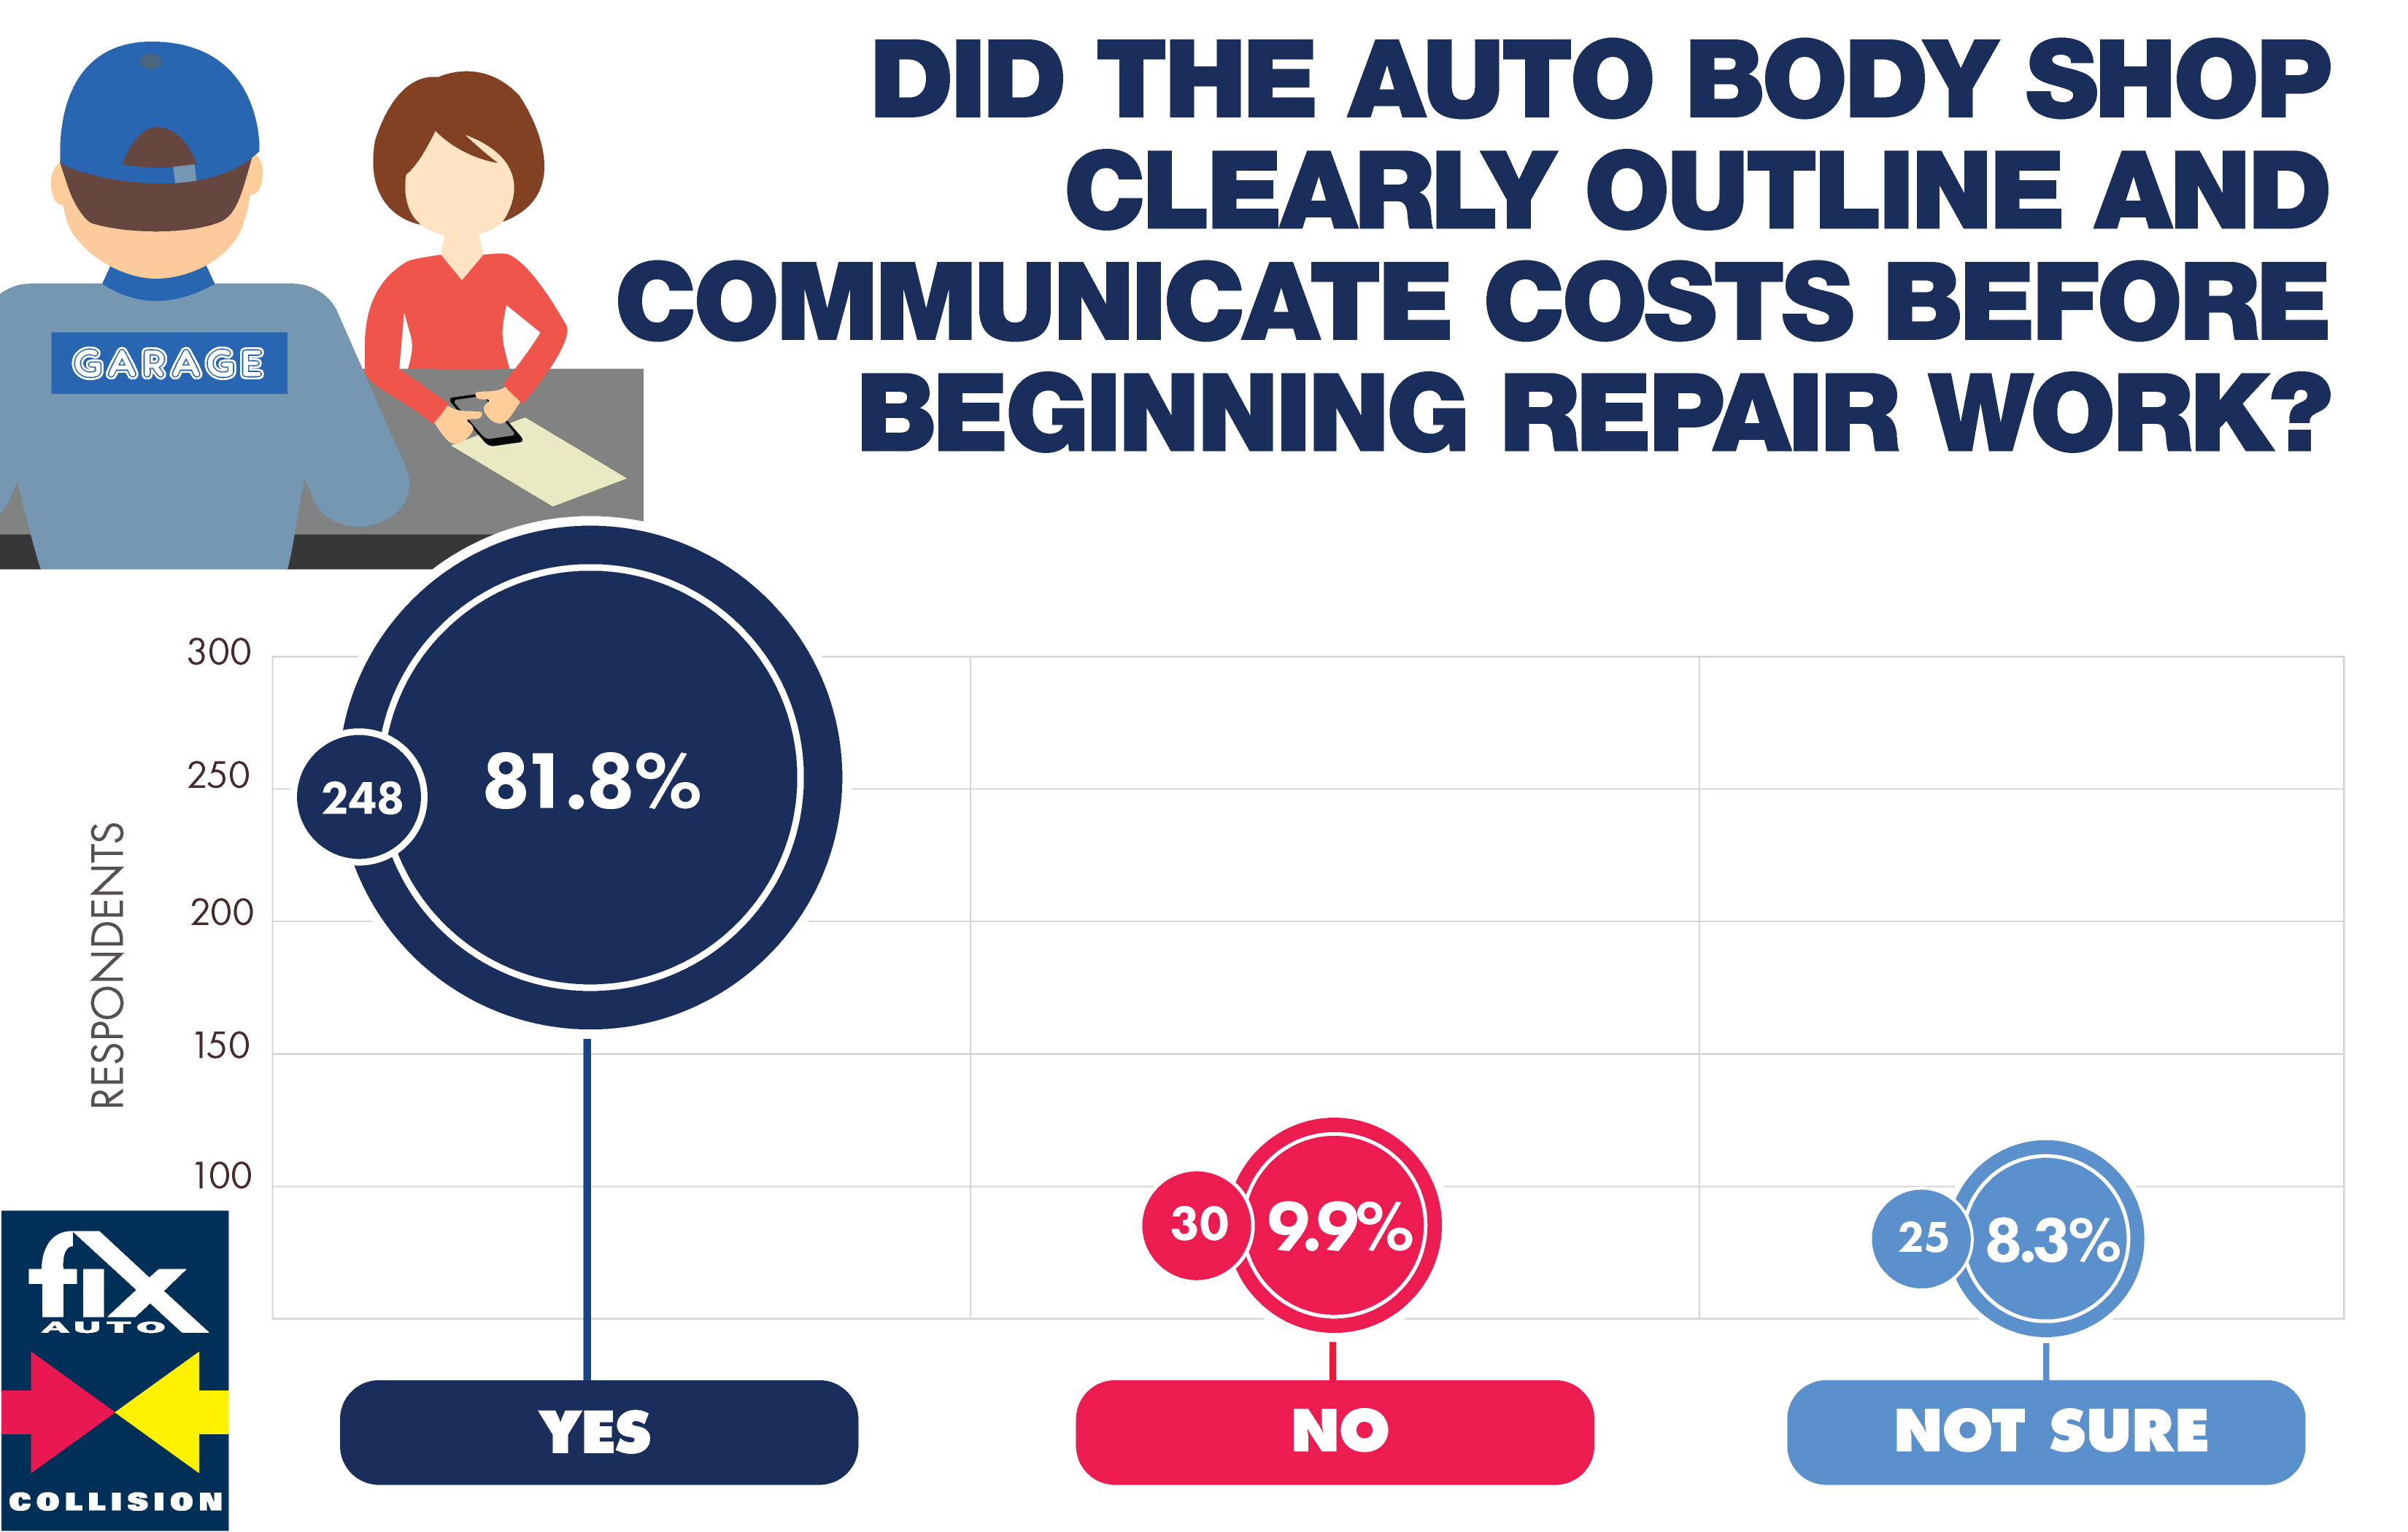 did the auto body shop clearly outline and communicate costs before beginning repair work